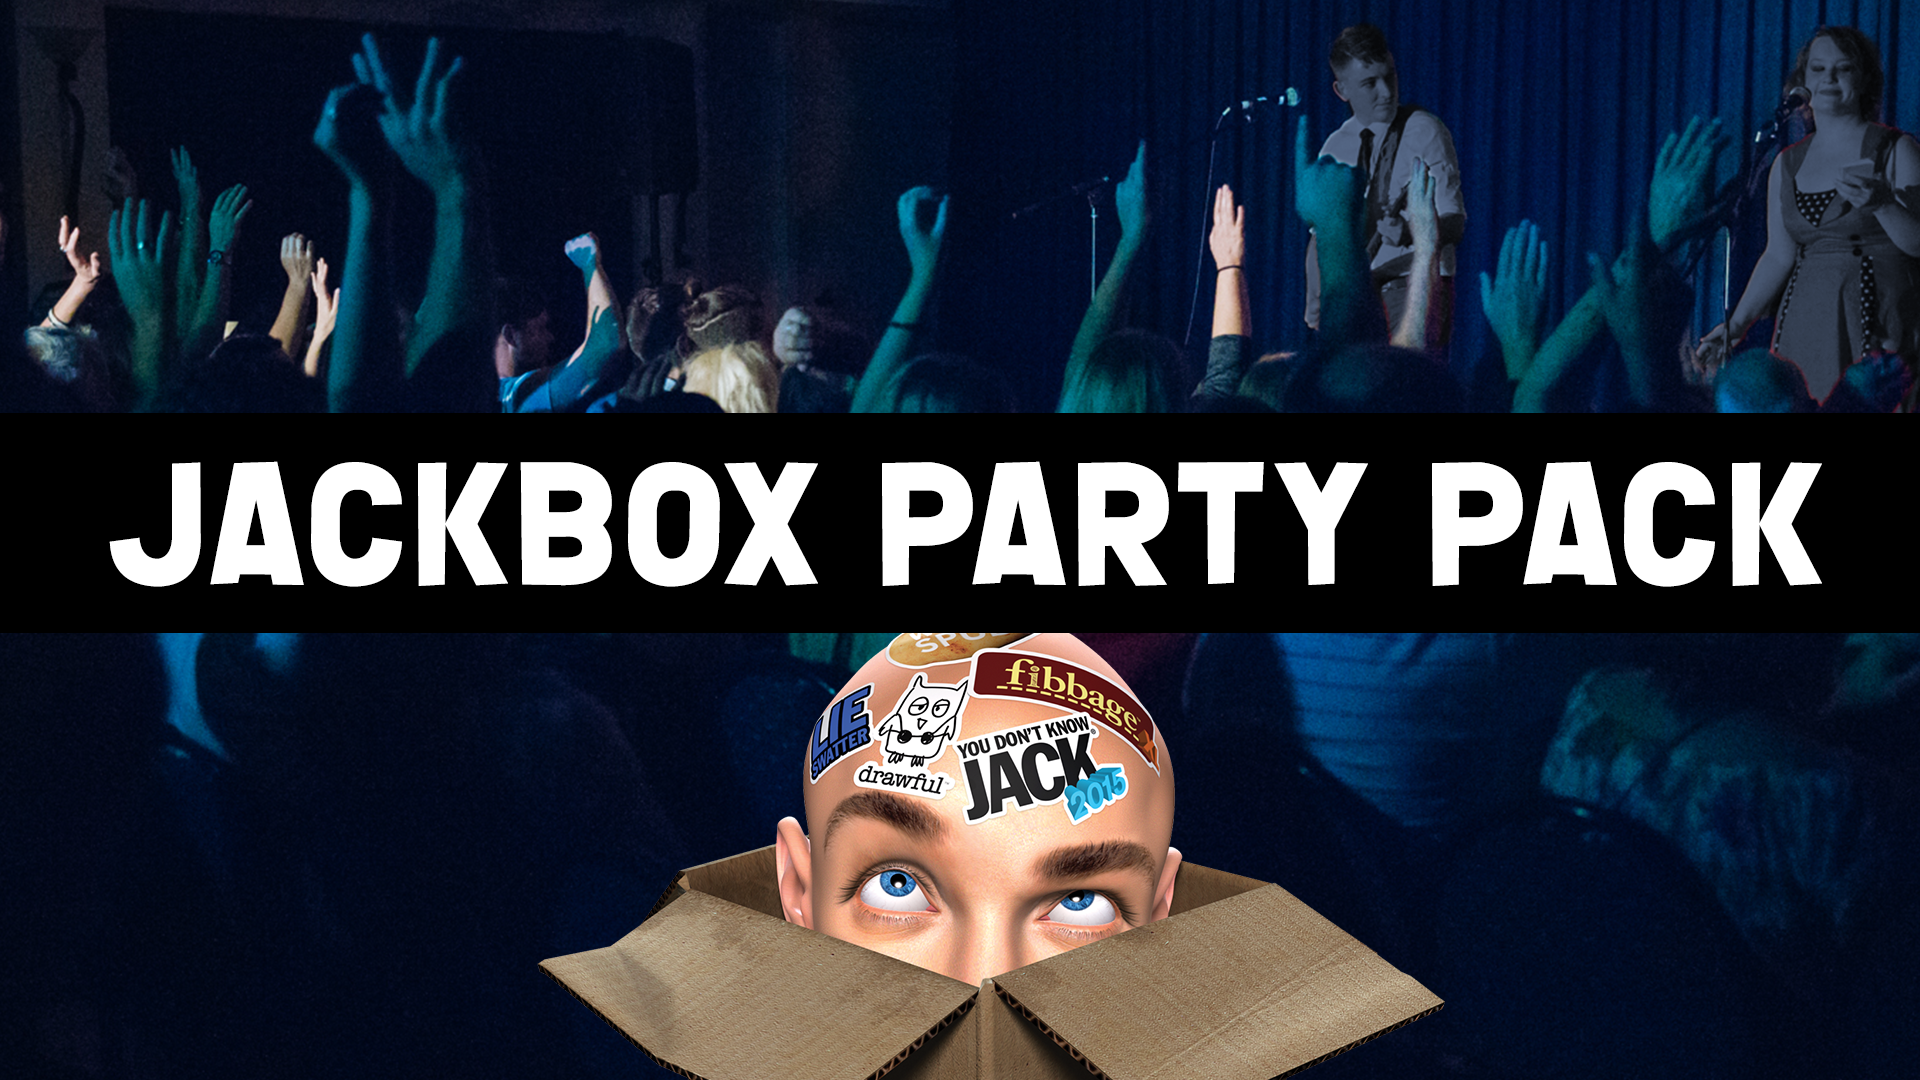 the jackbox party pack audience